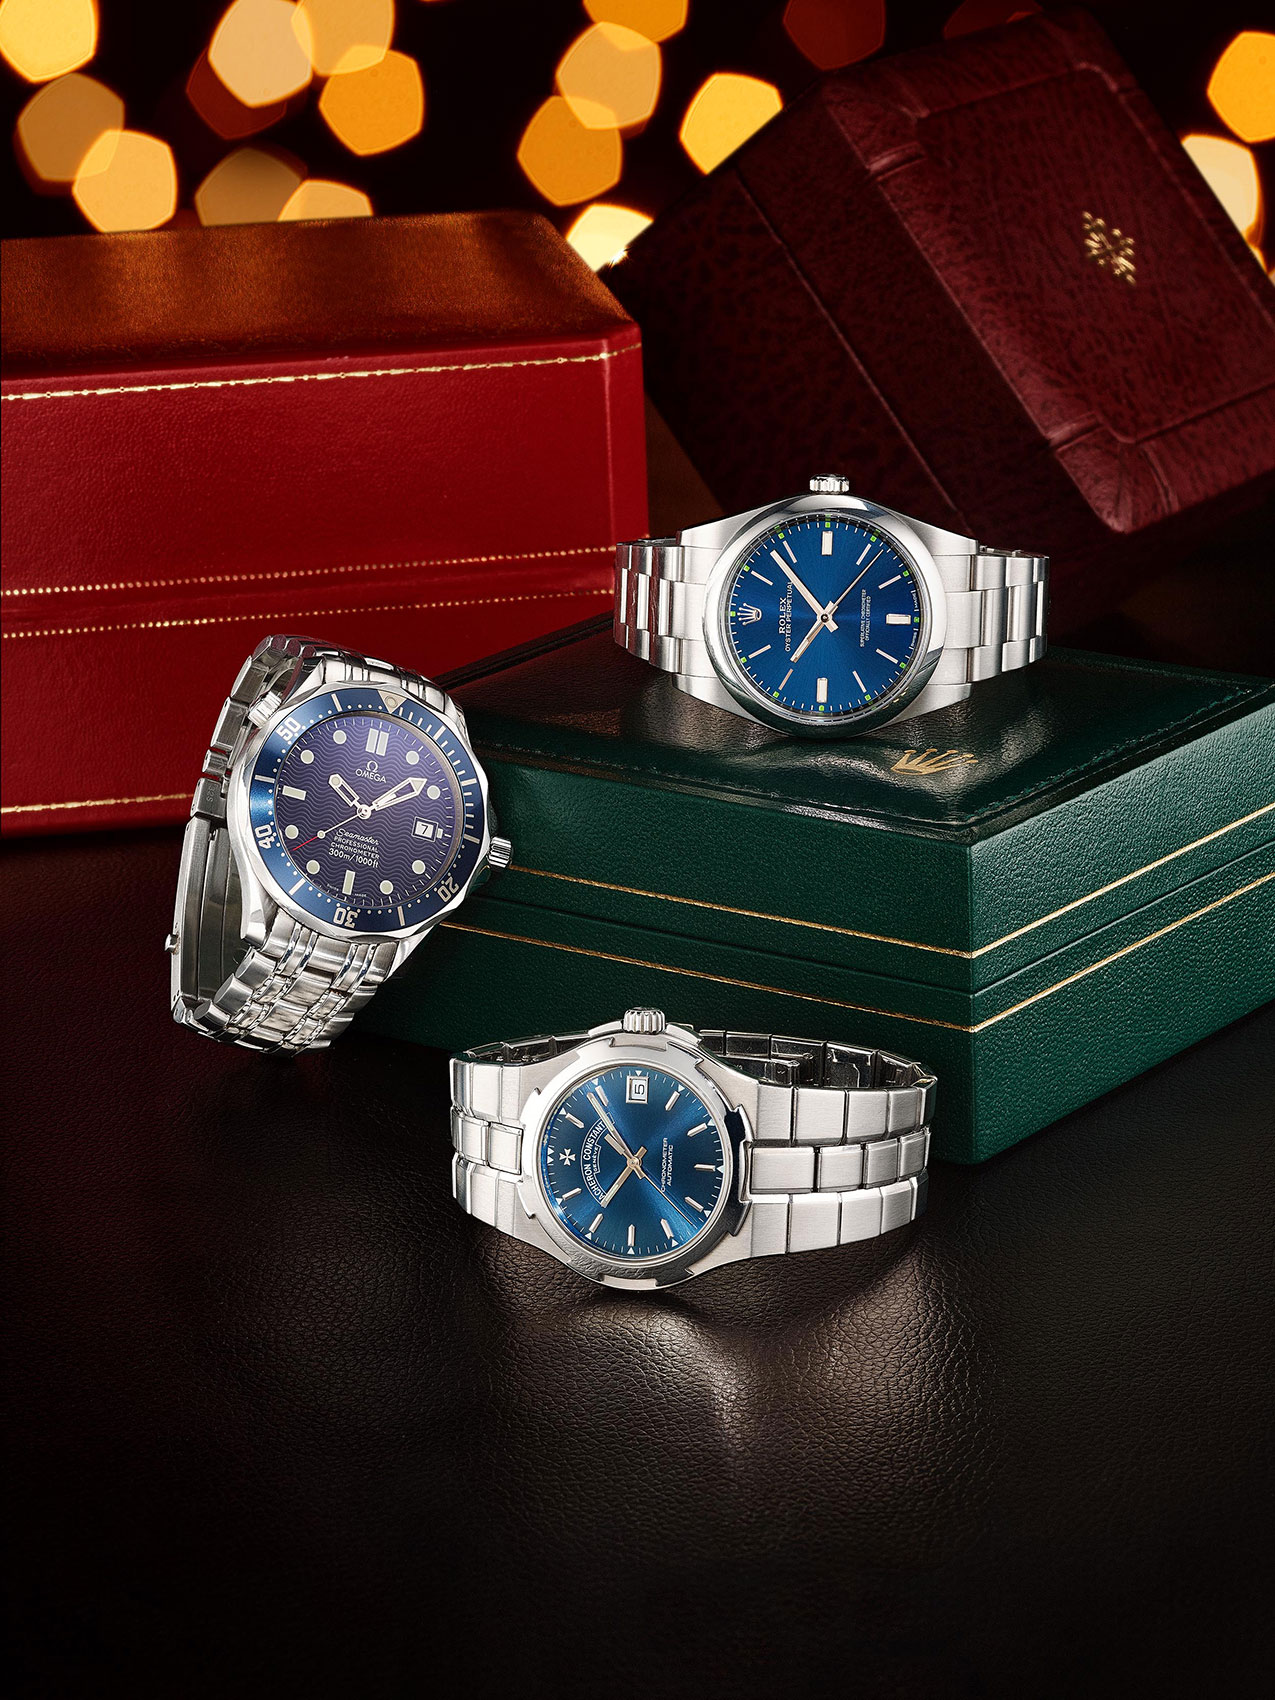 Three Silver Watches on Bokeh